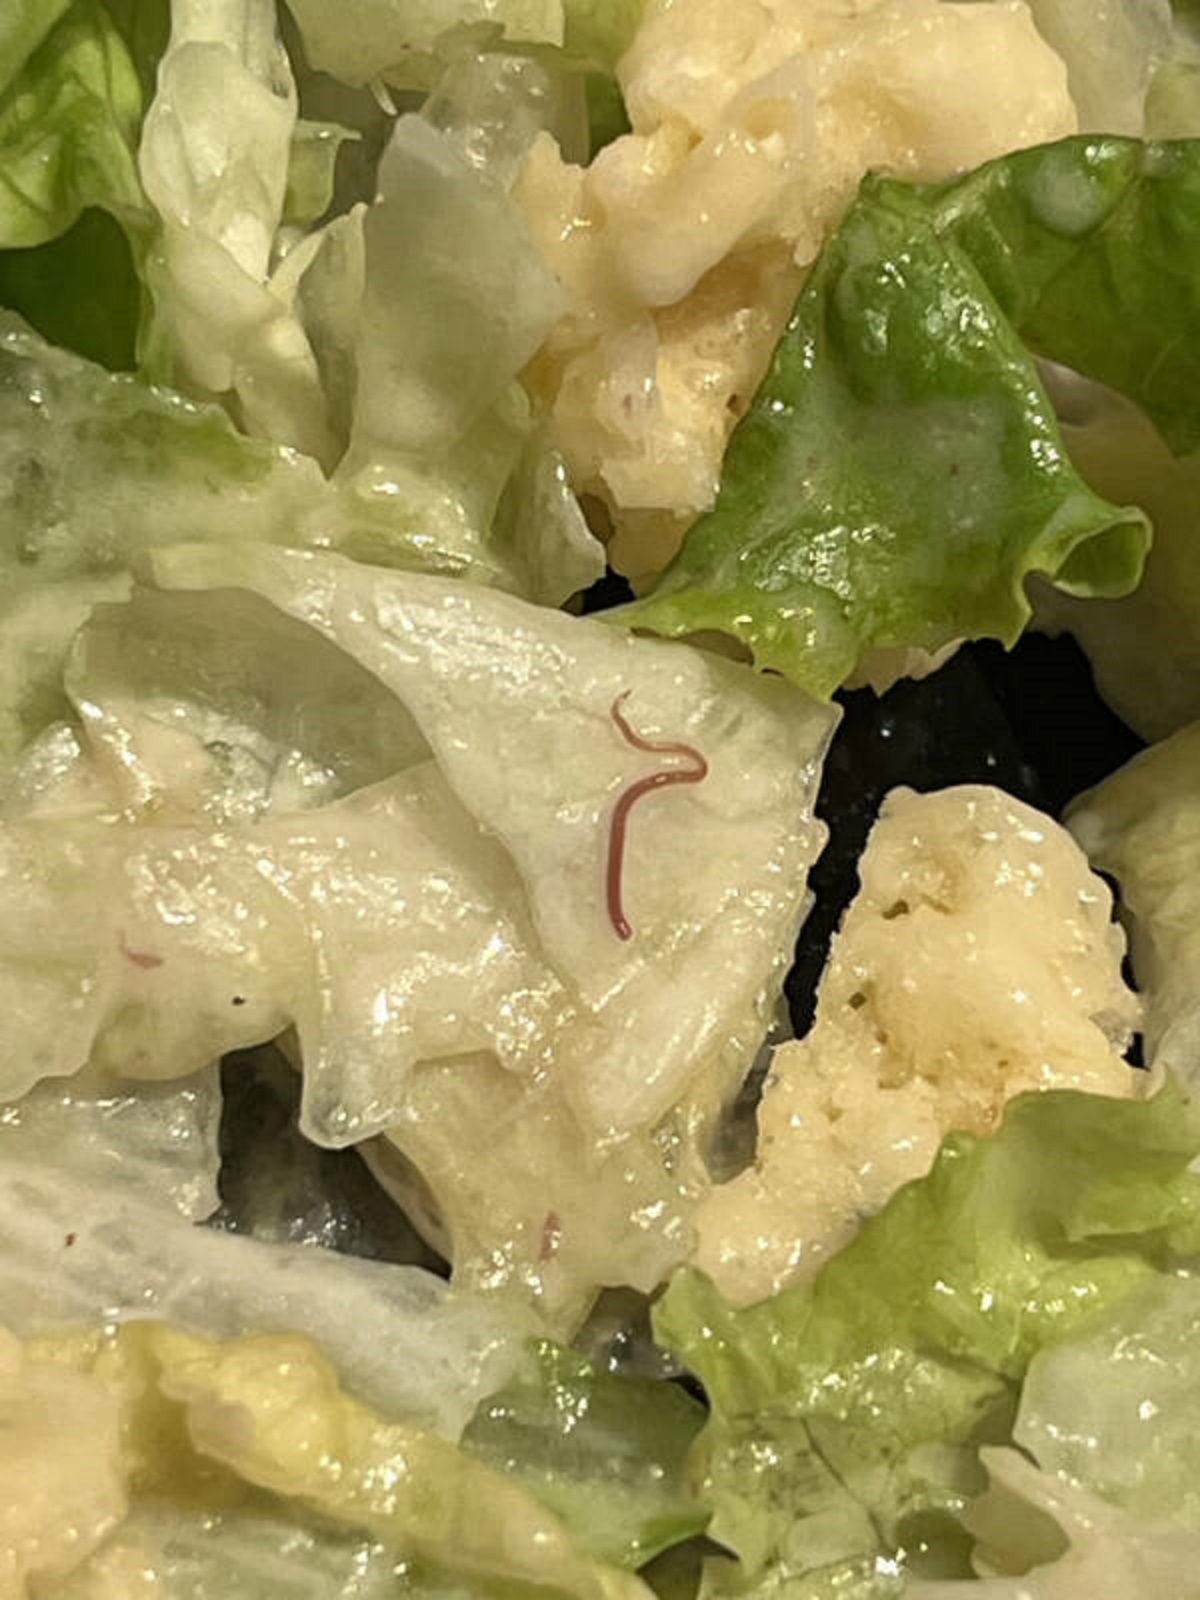 “So there I was enjoying a lemon Caesar salad. Then bam! This little guy comes out of nowhere.